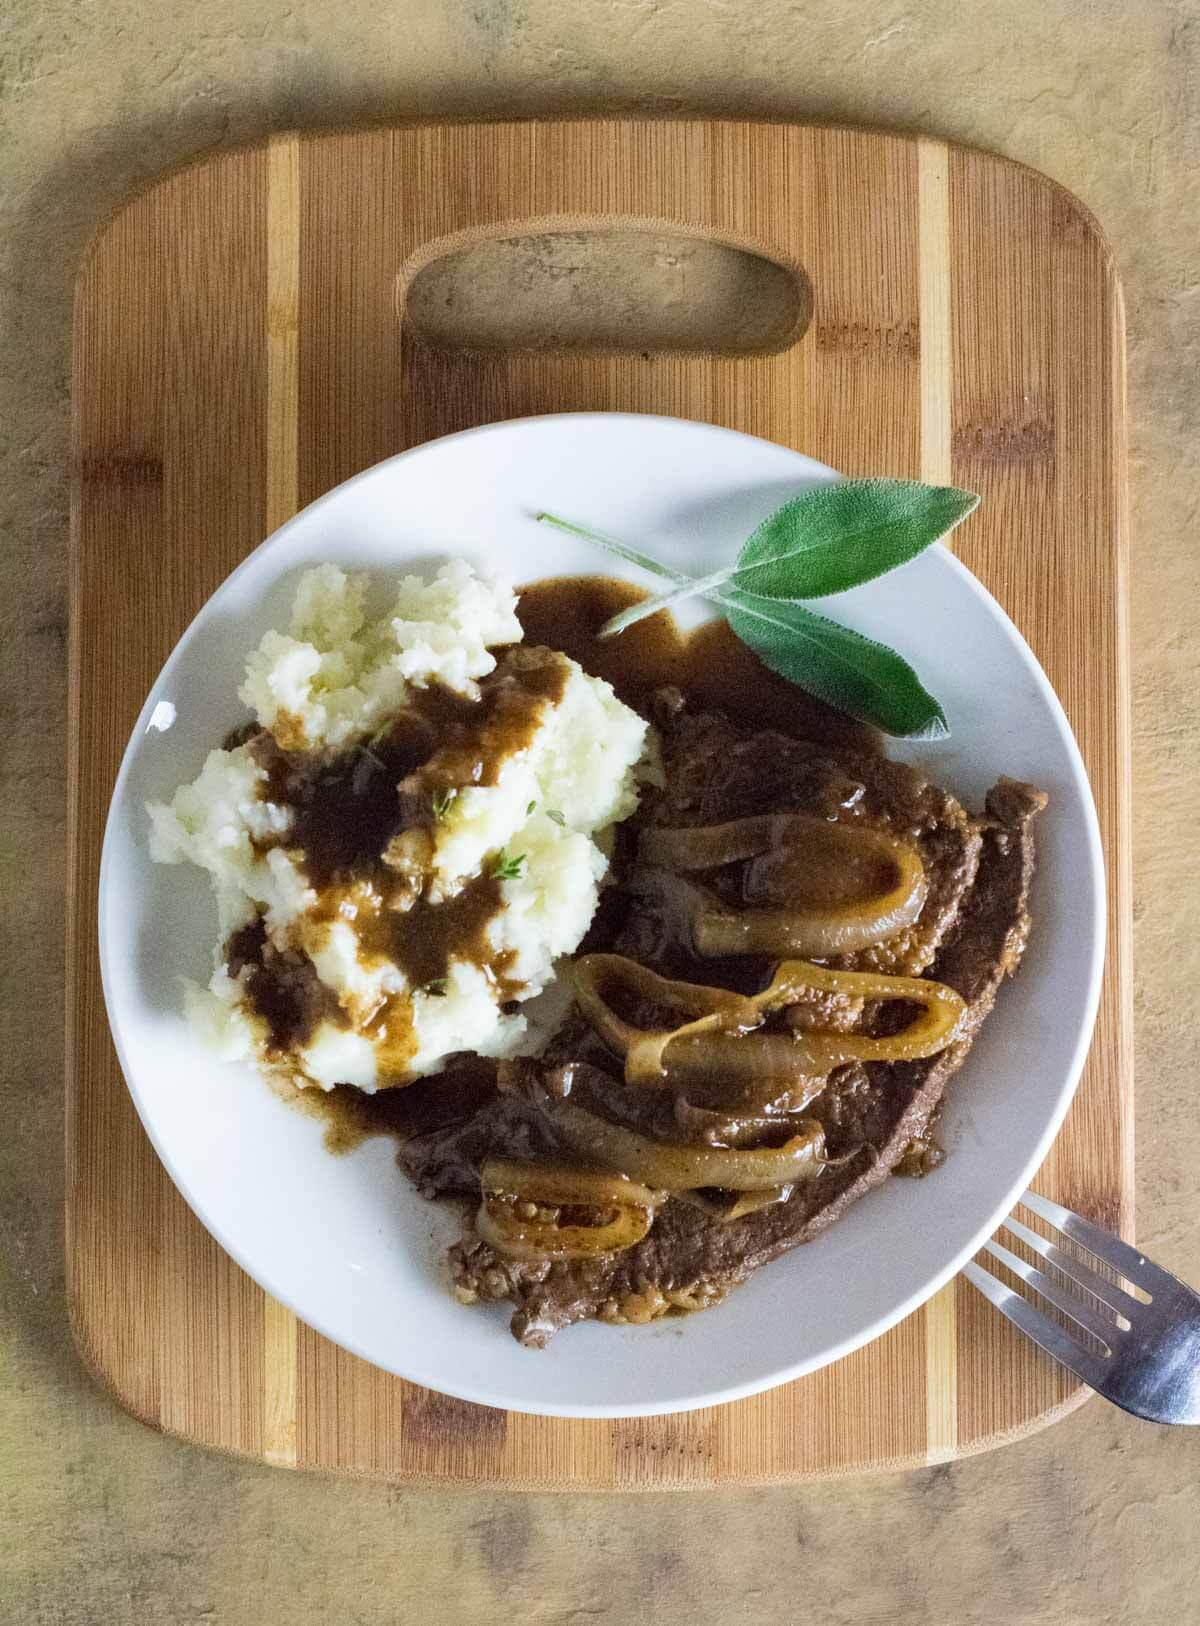 Liver and onions with gravy.